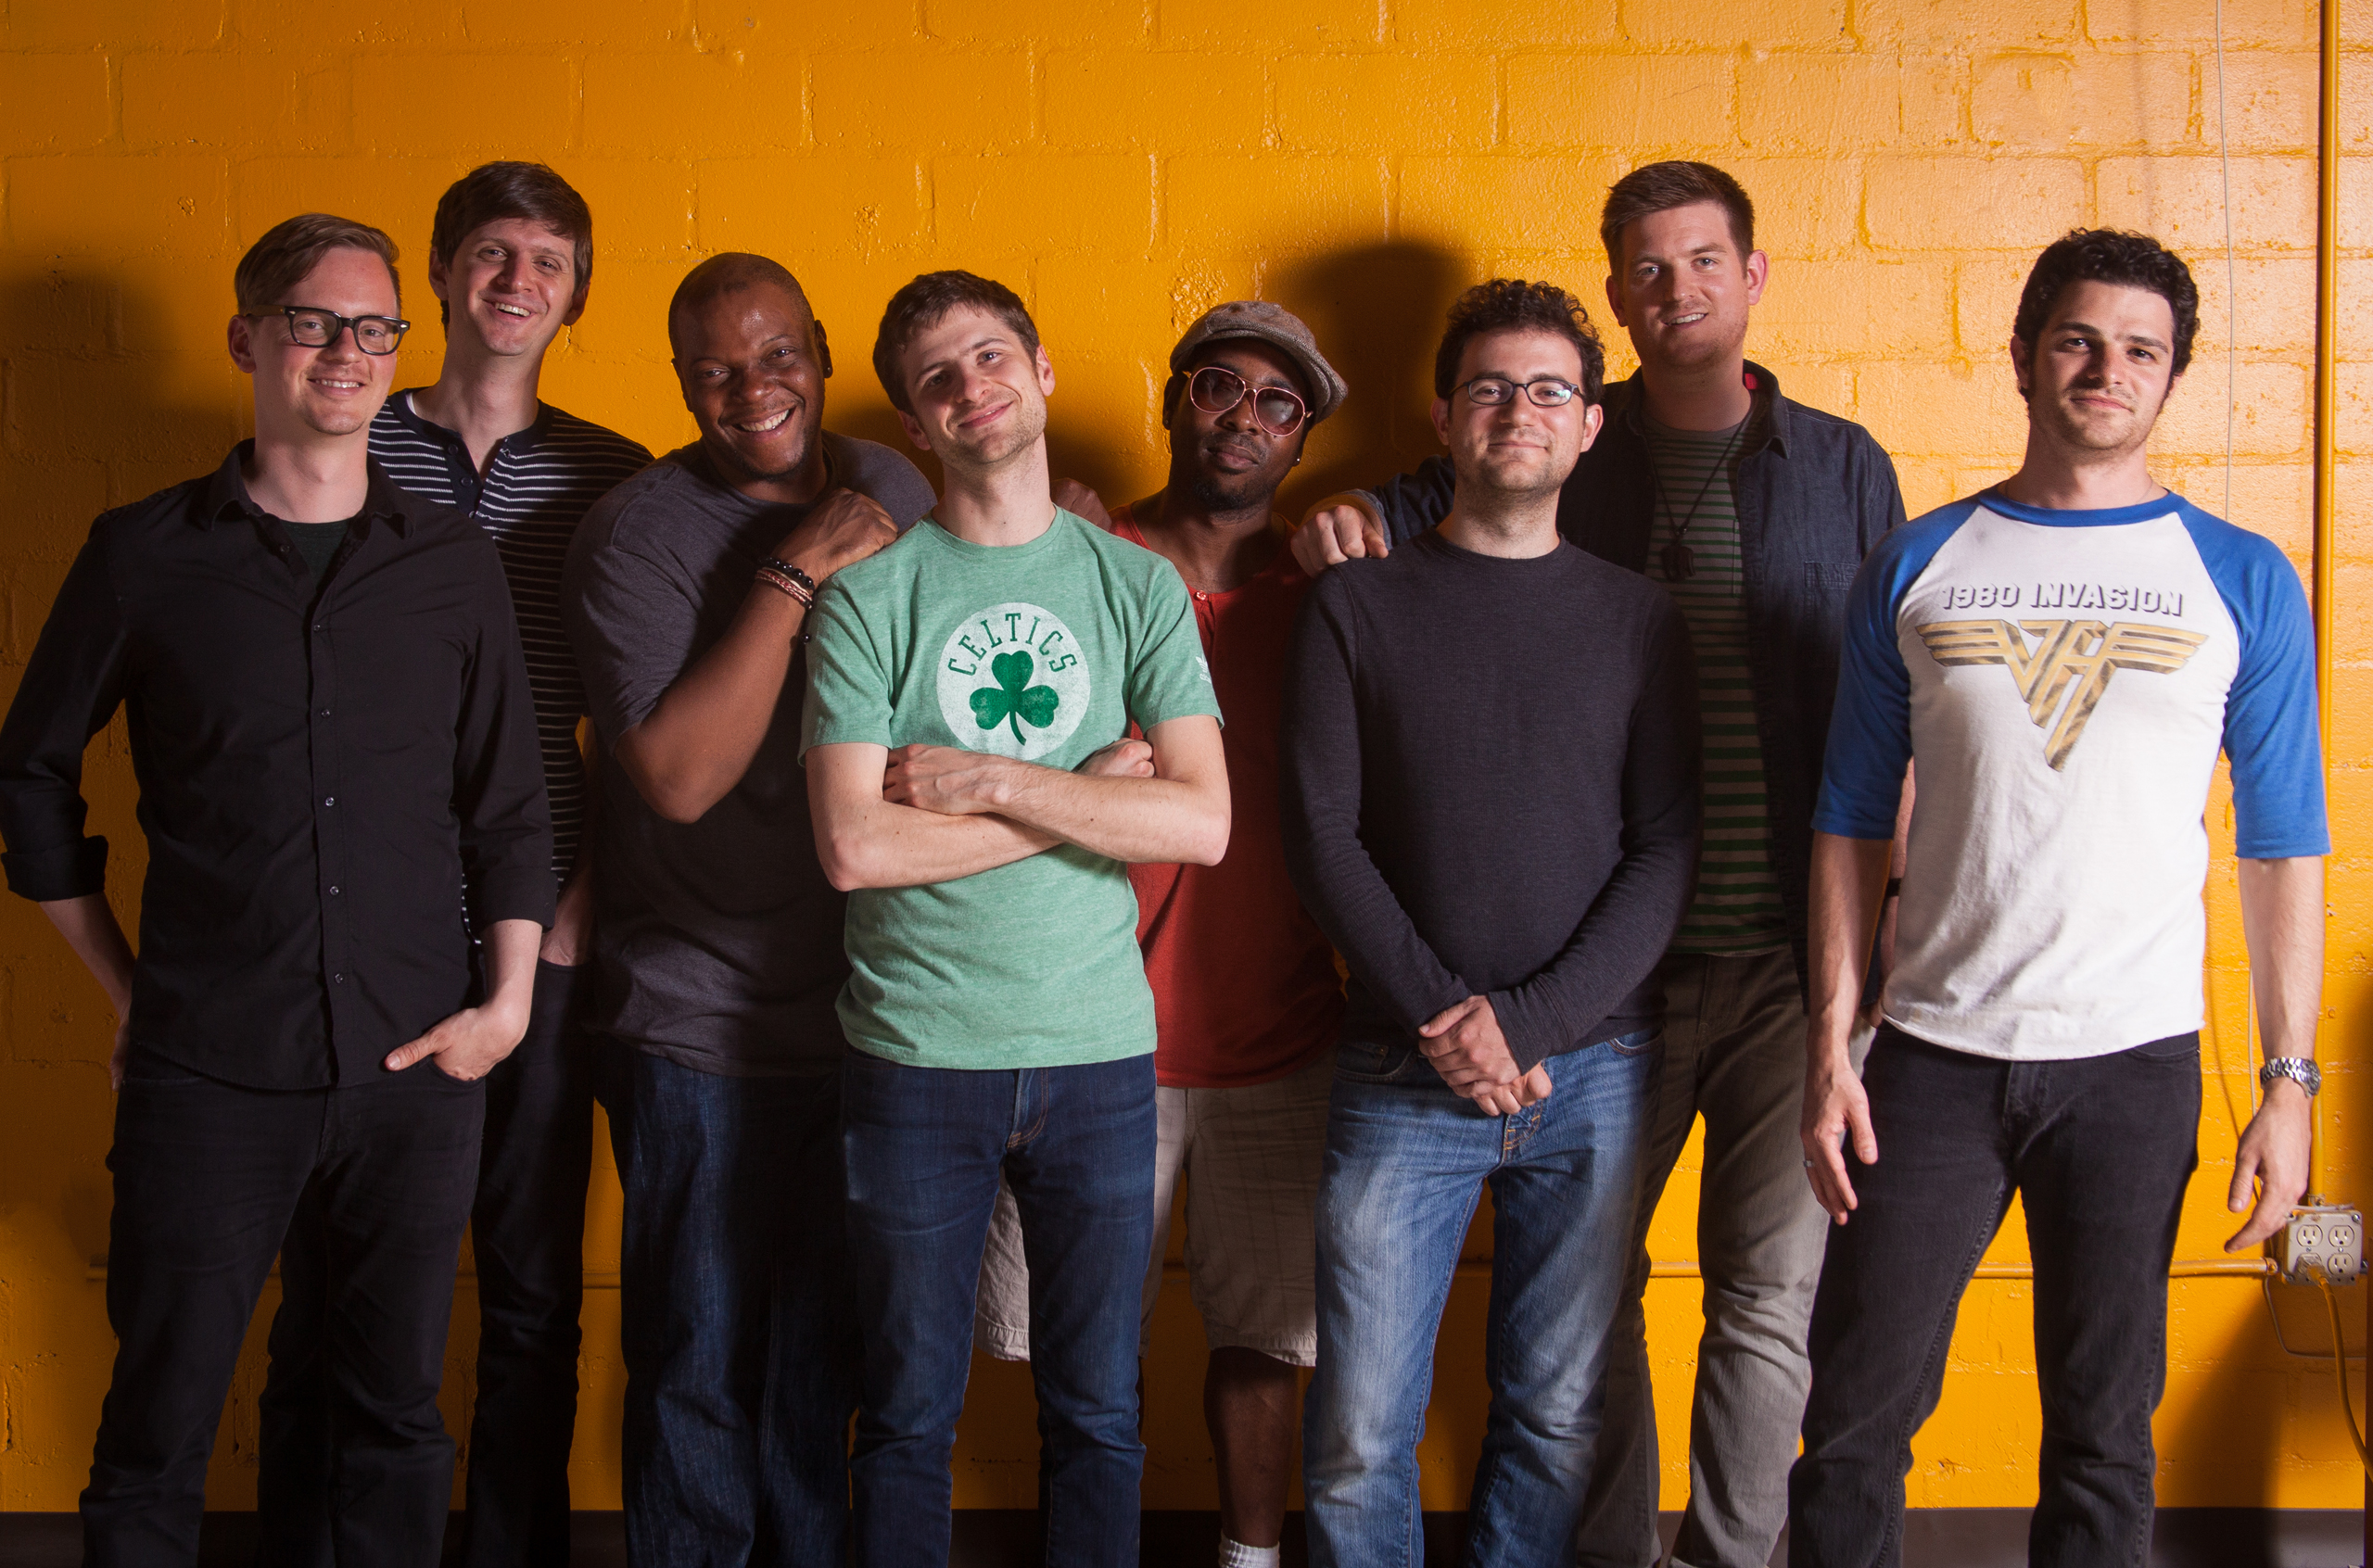 Snarky Puppy, led by UNT alumnus Michael League and made up of several alumni band members, won the Grammy Award for Best R&B Performance at the 56th Annual Grammy Awards.

